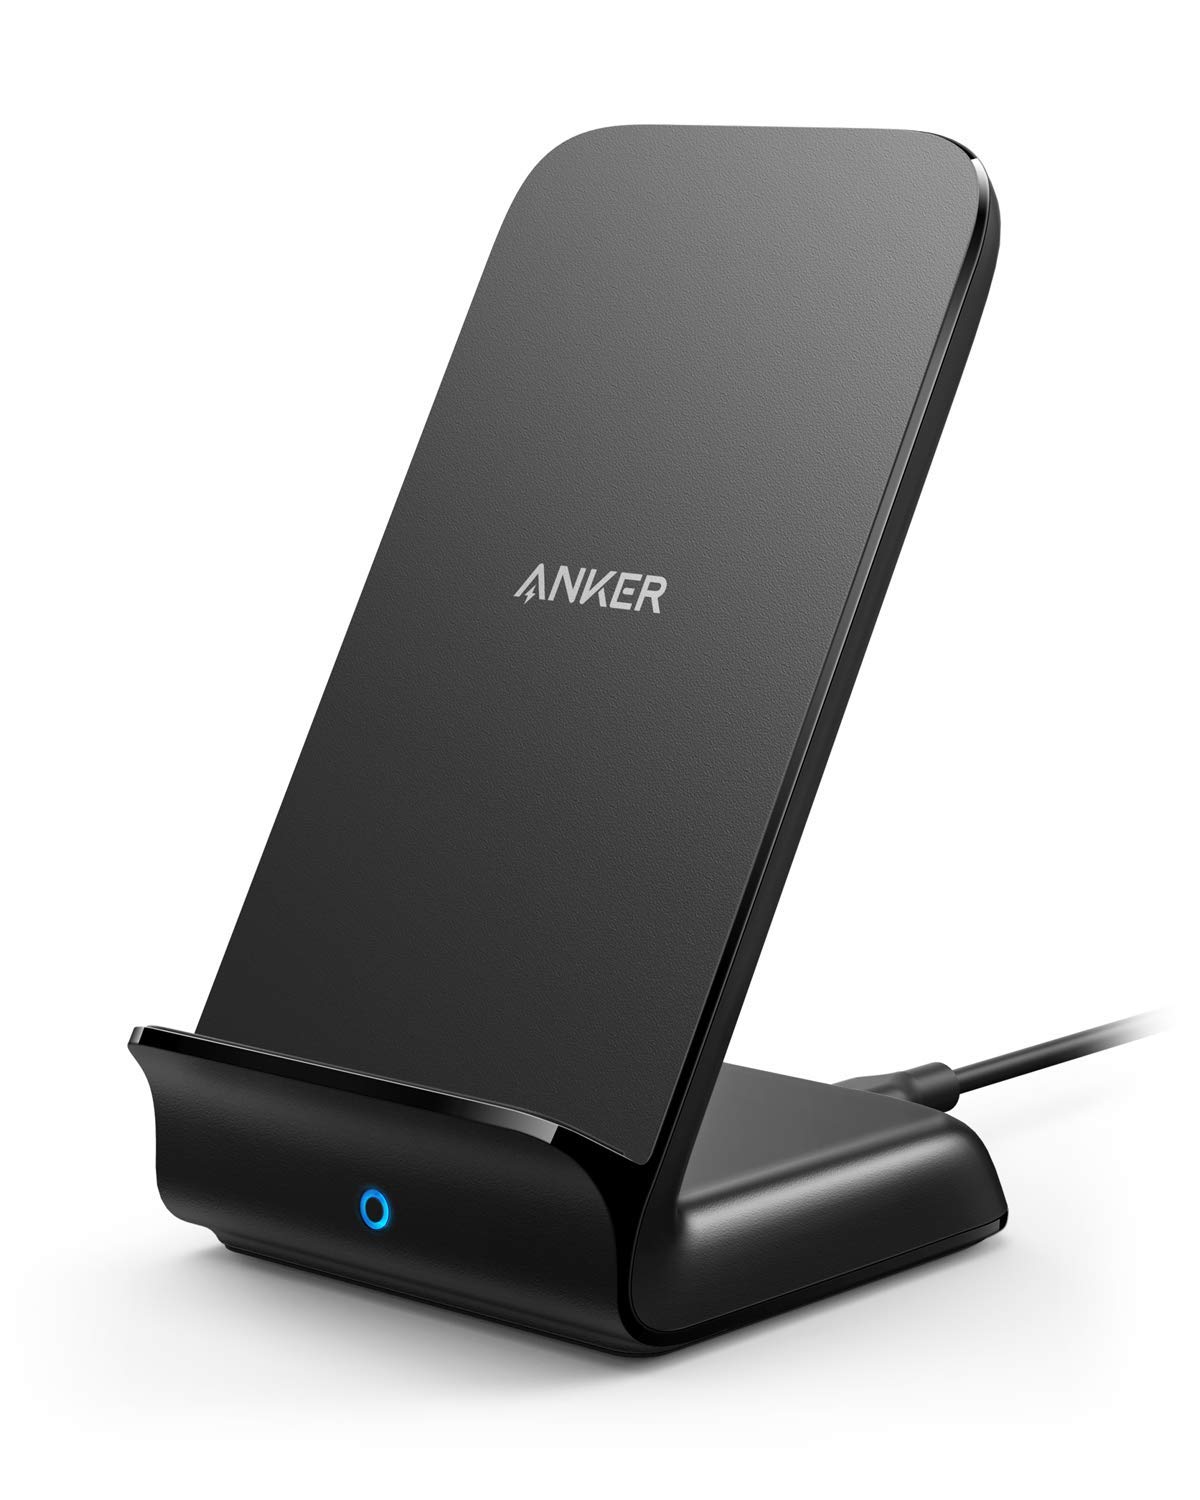 Anker、｢iPhone XS/XR｣の急速充電にも対応したワイヤレス充電器｢Anker PowerWave 7.5 Stand｣を発売 ｰ 200個限定で10％オフ